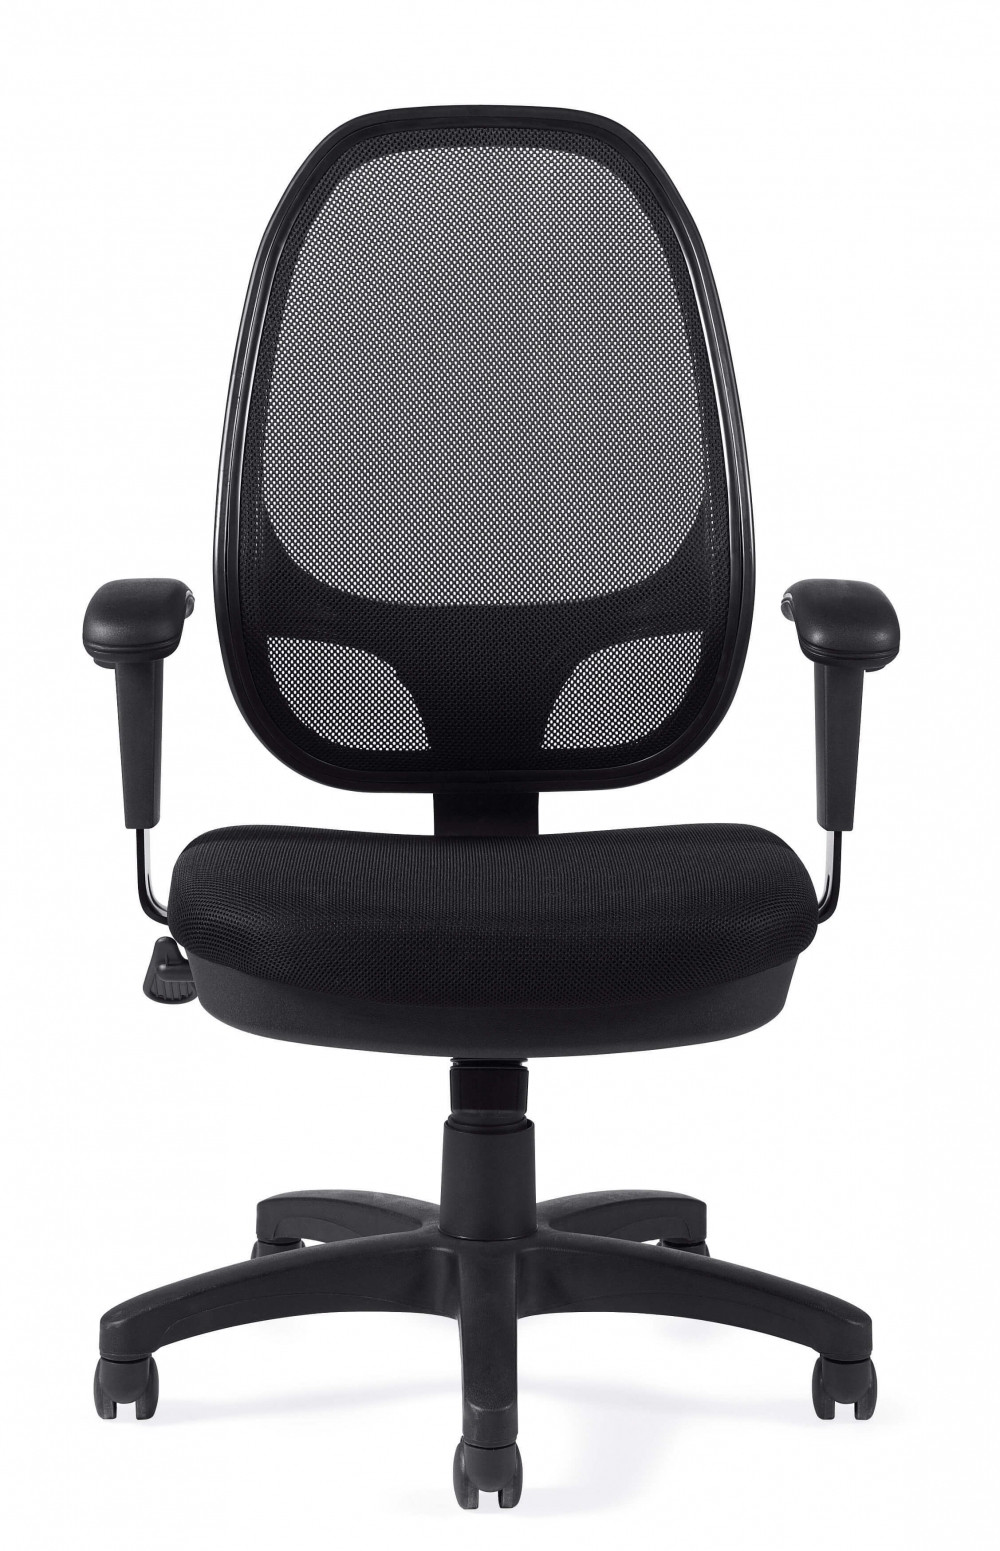 Adjustable chairs front view